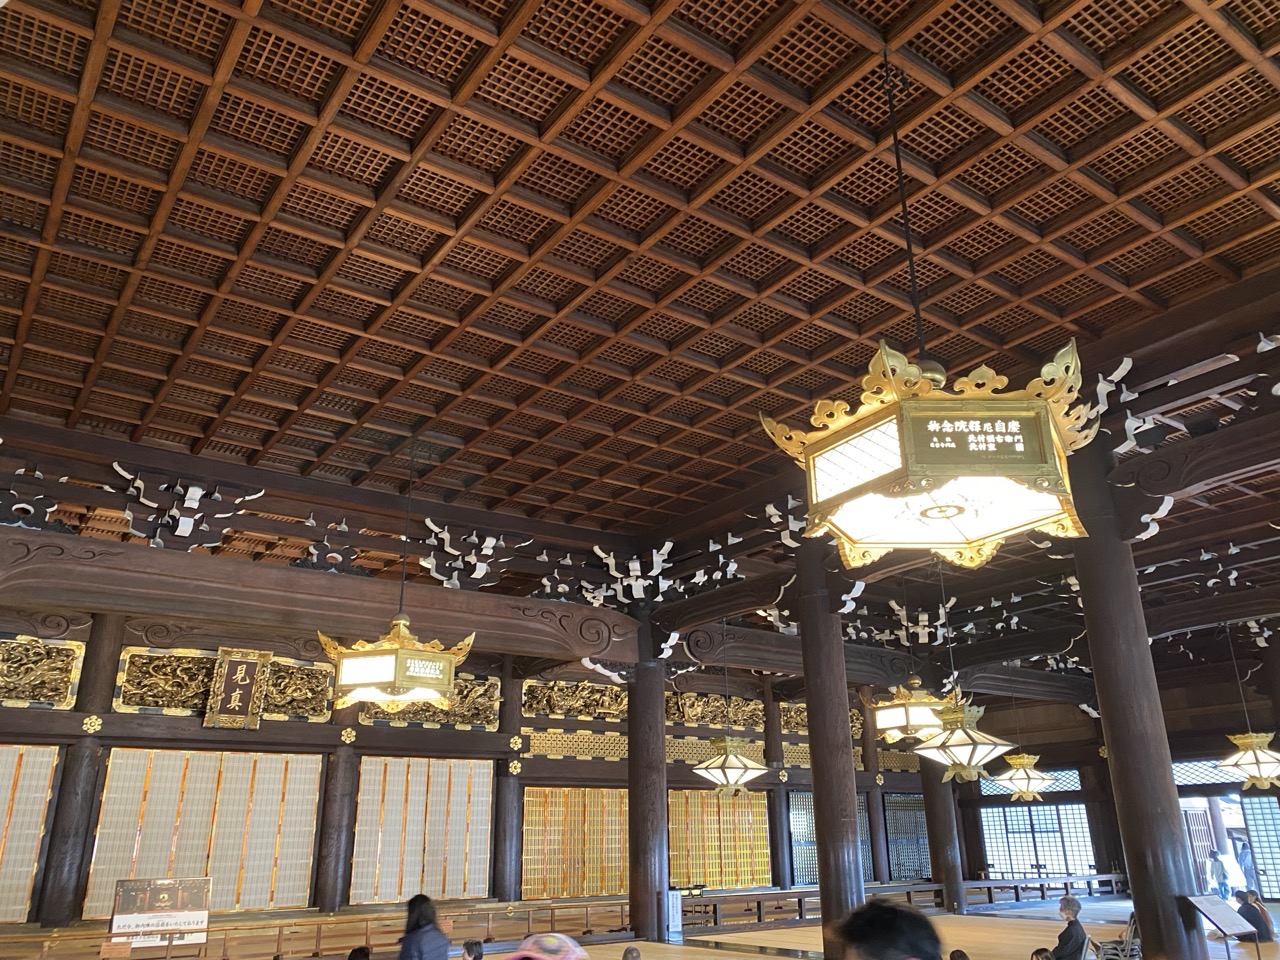 The inside of the temple showing the wooden ceiling and hanging lights